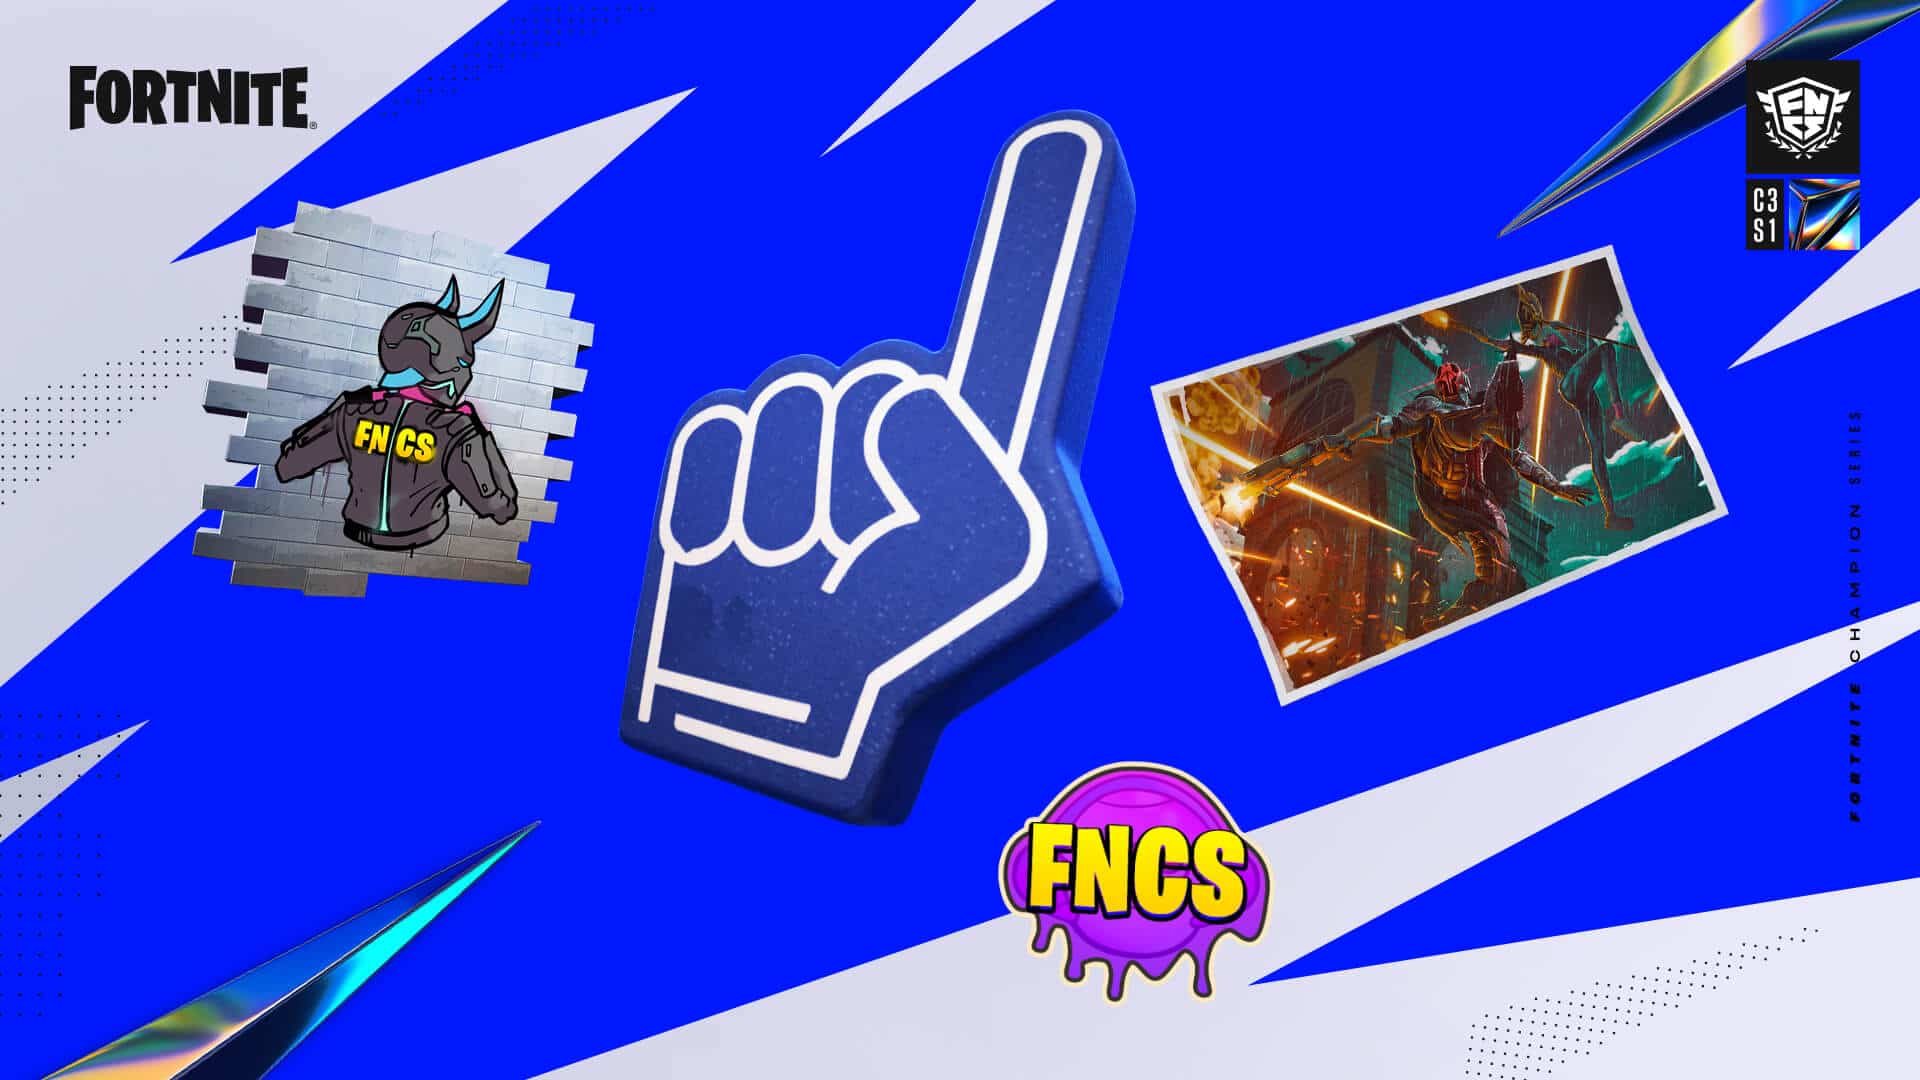 How to get Fortnite Twitch Drops of Chapter 3 Season 1 FNCS